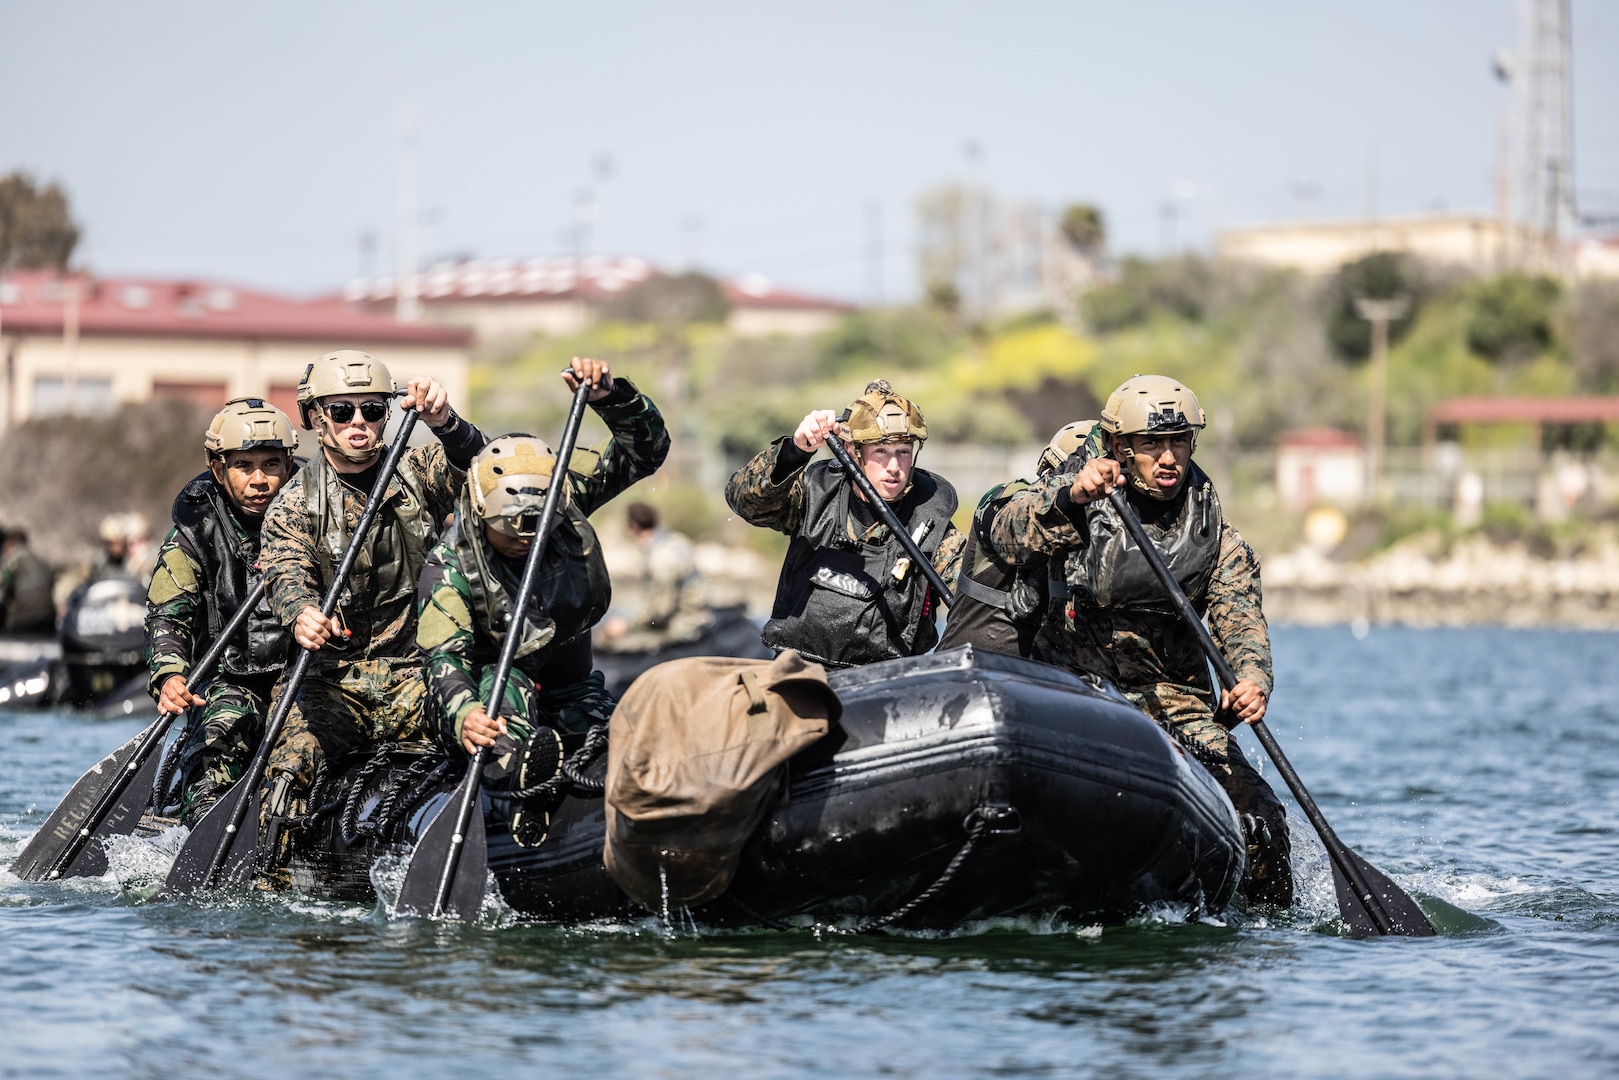 U.S. Marines with 2nd Platoon, Charlie Company, 1st Reconnaissance Battalion, 1st Marine Division, and members of the 2nd Intai Amfibi Battalion, Indonesian Korps Marinir, paddle back to shore on a combat rubber raiding craft during a reconnaissance exercise at Marine Corps Base Camp Pendleton, California, April 15, 2023. The Marines of 1st Recon Bn. host the bilateral training exercise annually to foster a spirit of cooperation and mutual respect between Indonesian service members and 1st MARDIV Marines and promote cultural exchange and understanding.